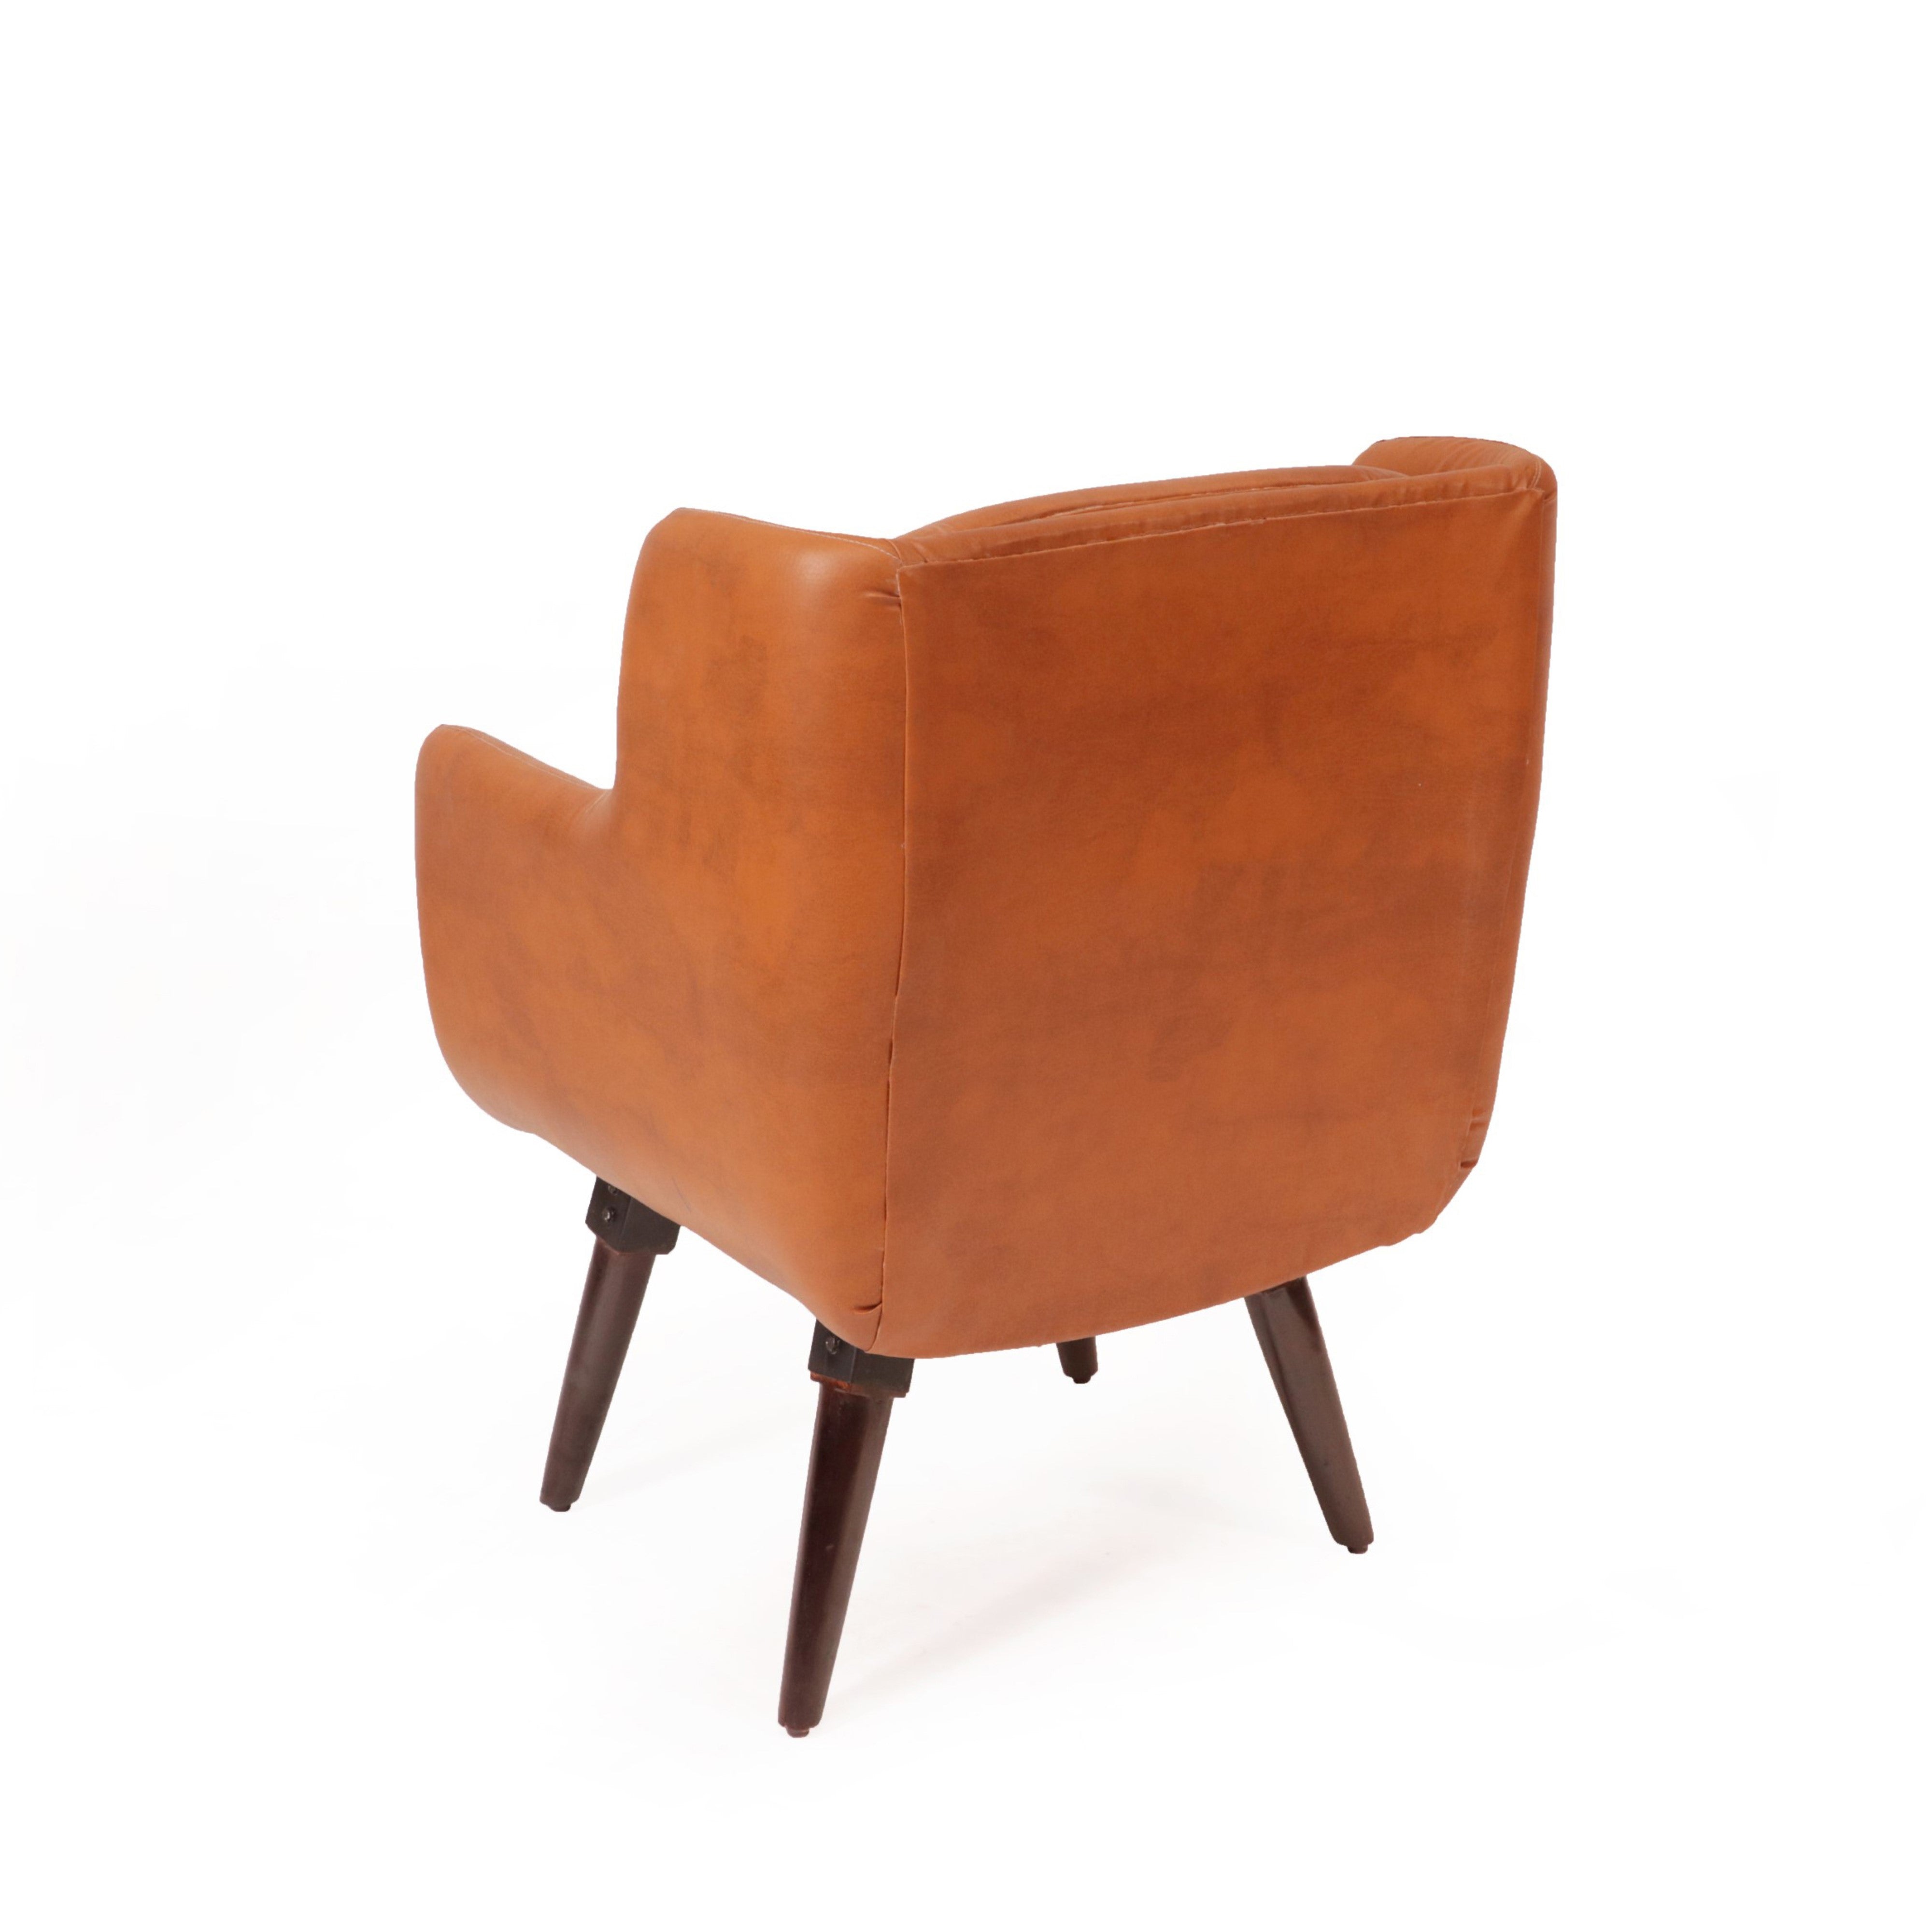 Acentric Upholstered Chair Arm Chair